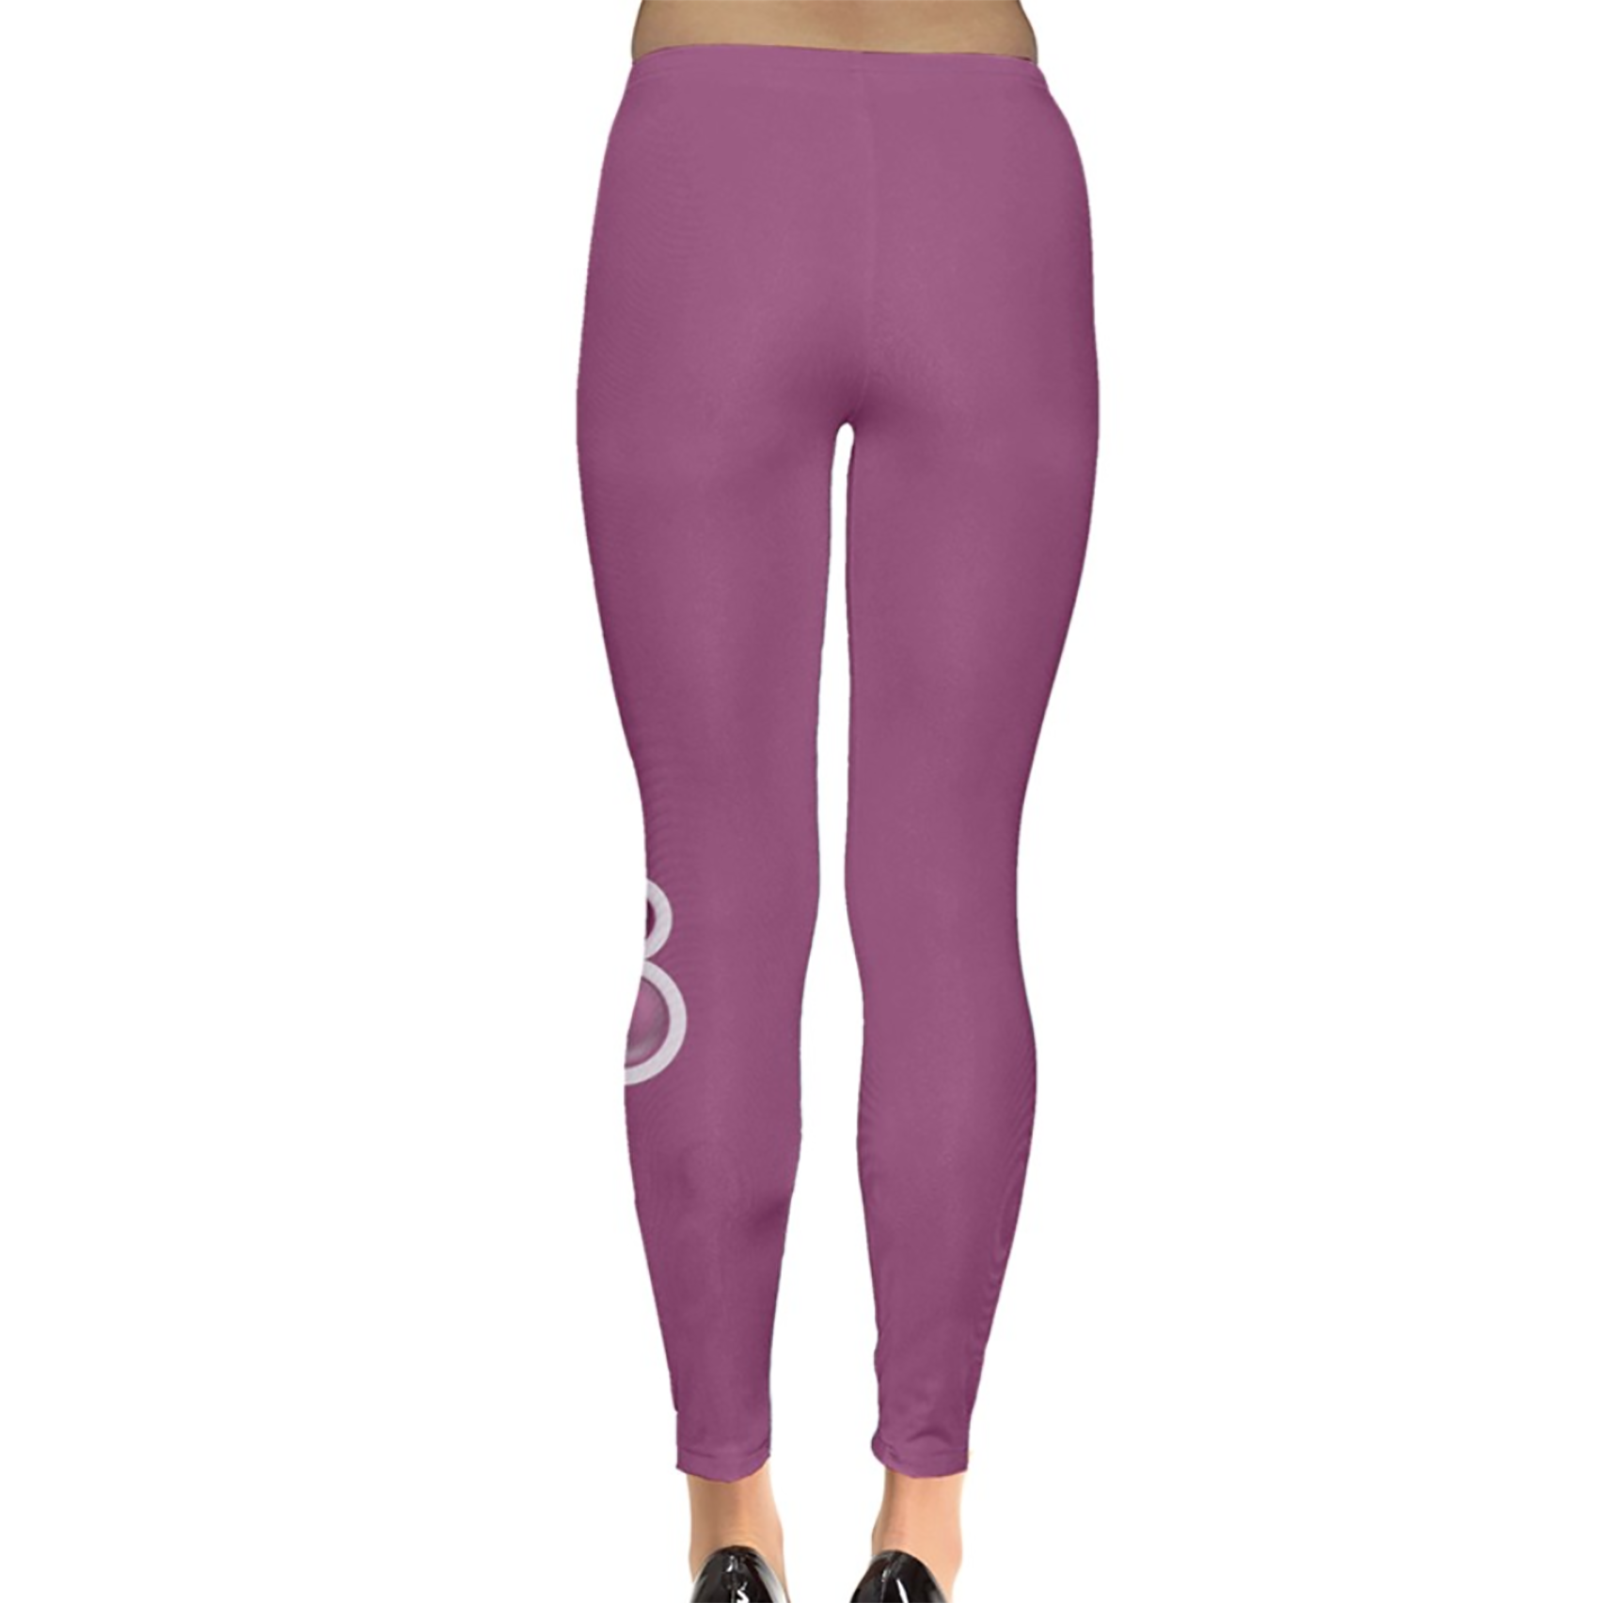 Charmed Leggings (Pink Solid w/Love Potion)